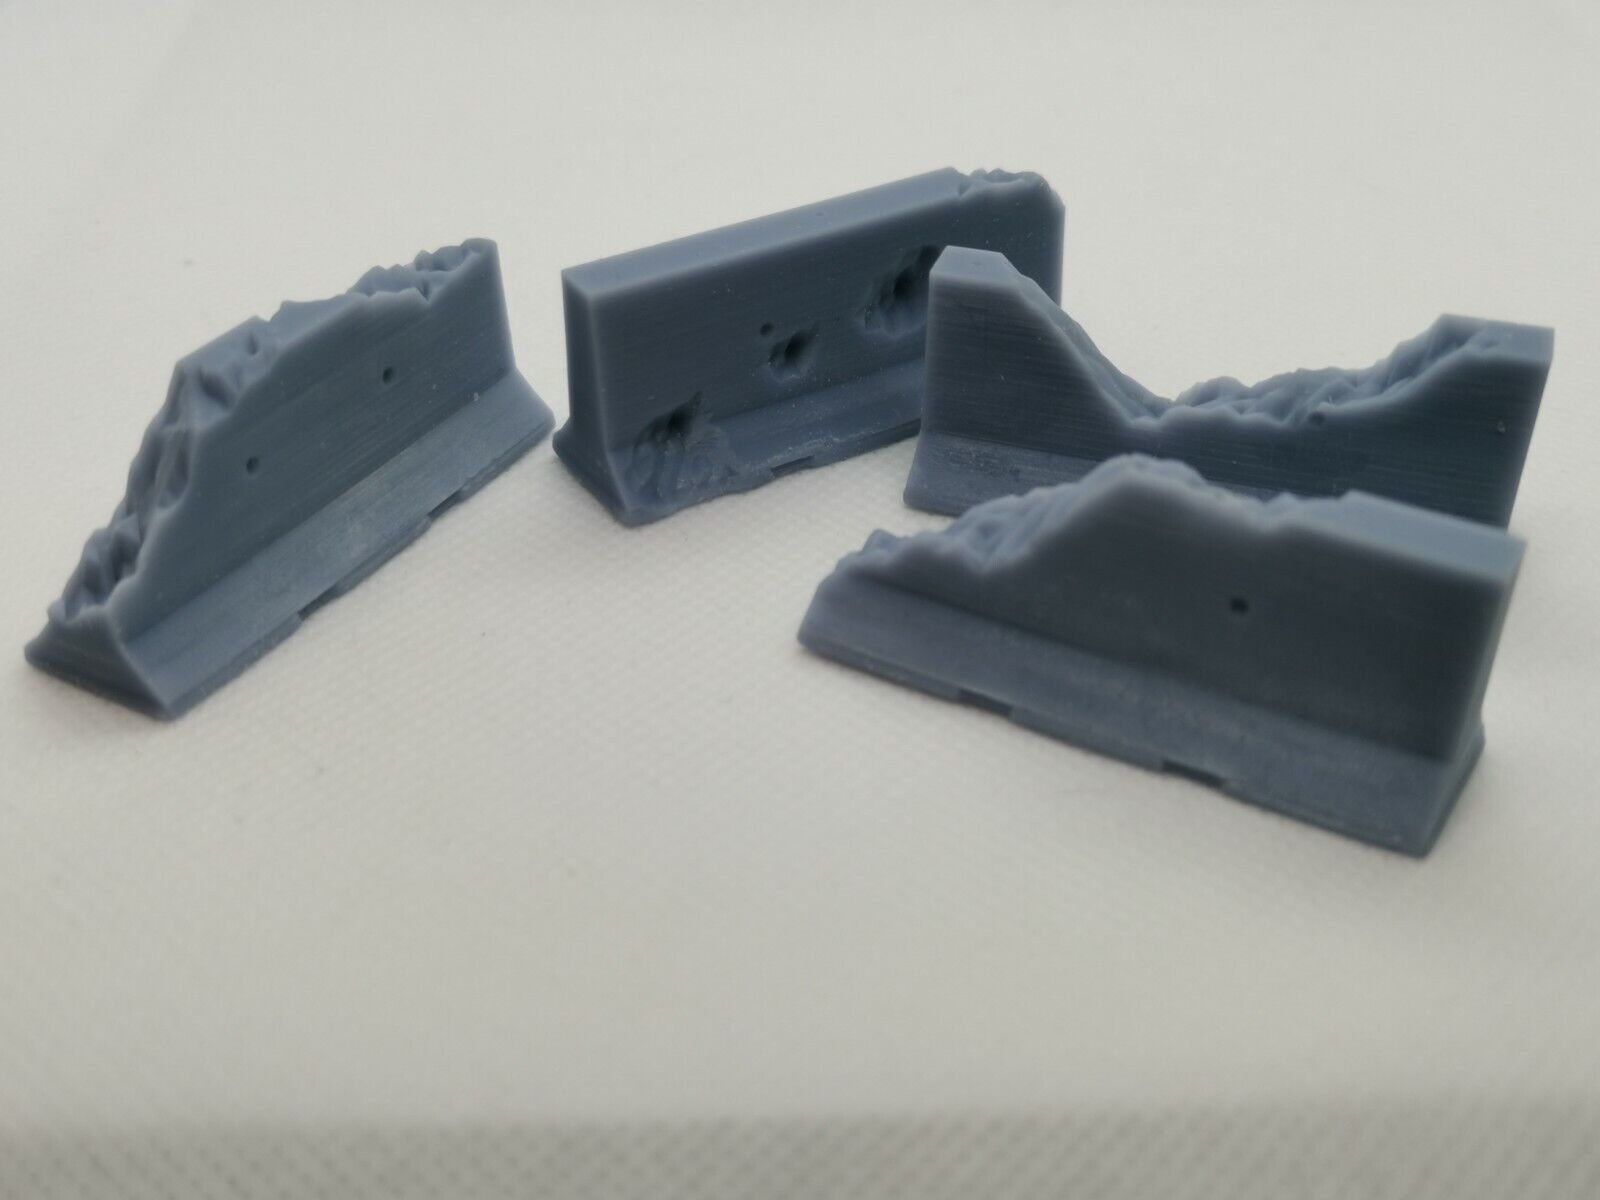 8 x Concrete Jersey Barriers - Compatible with Wargames / WH Scenery 40k etc